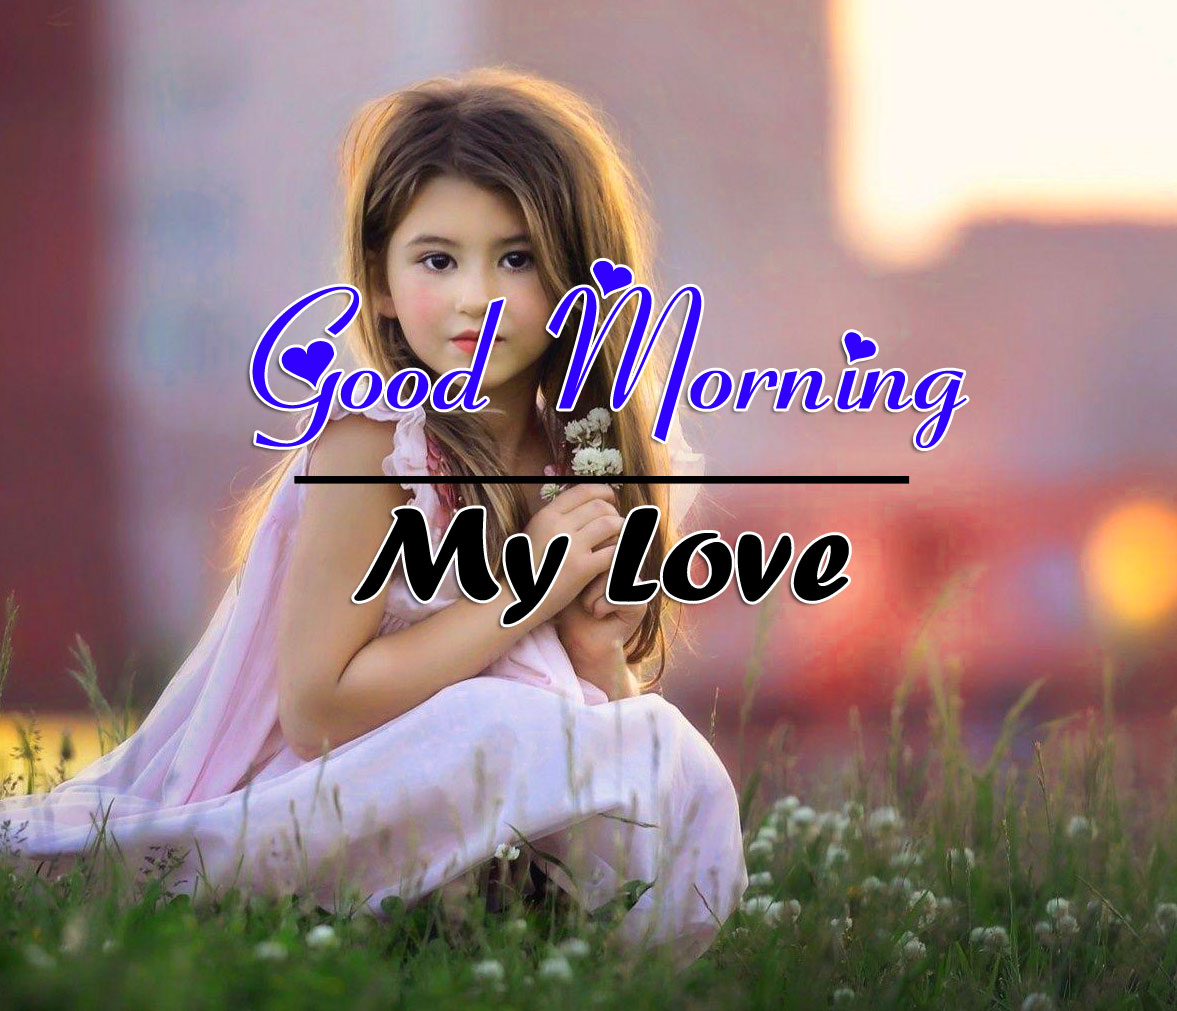 New Good Morning Images Free